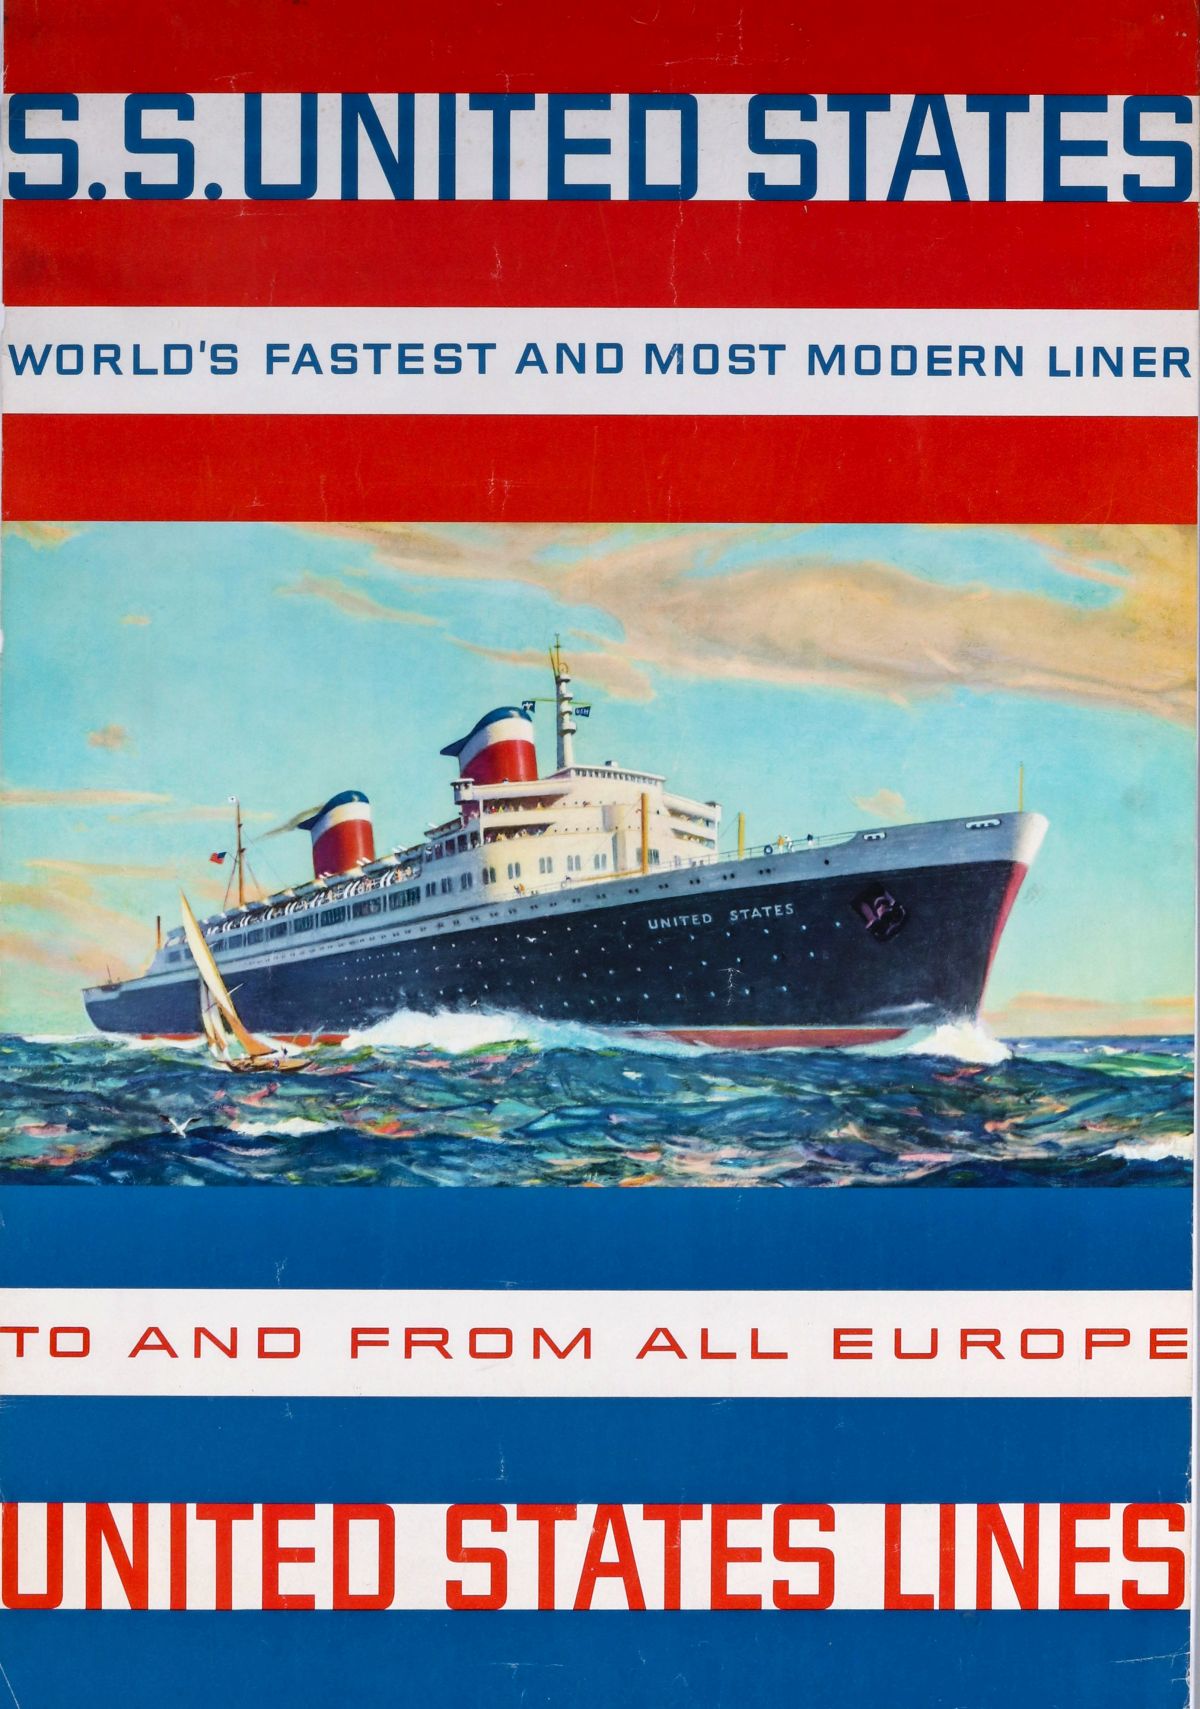 UNITED STATES LINES OCEAN LINER ADVERTISING POSTER